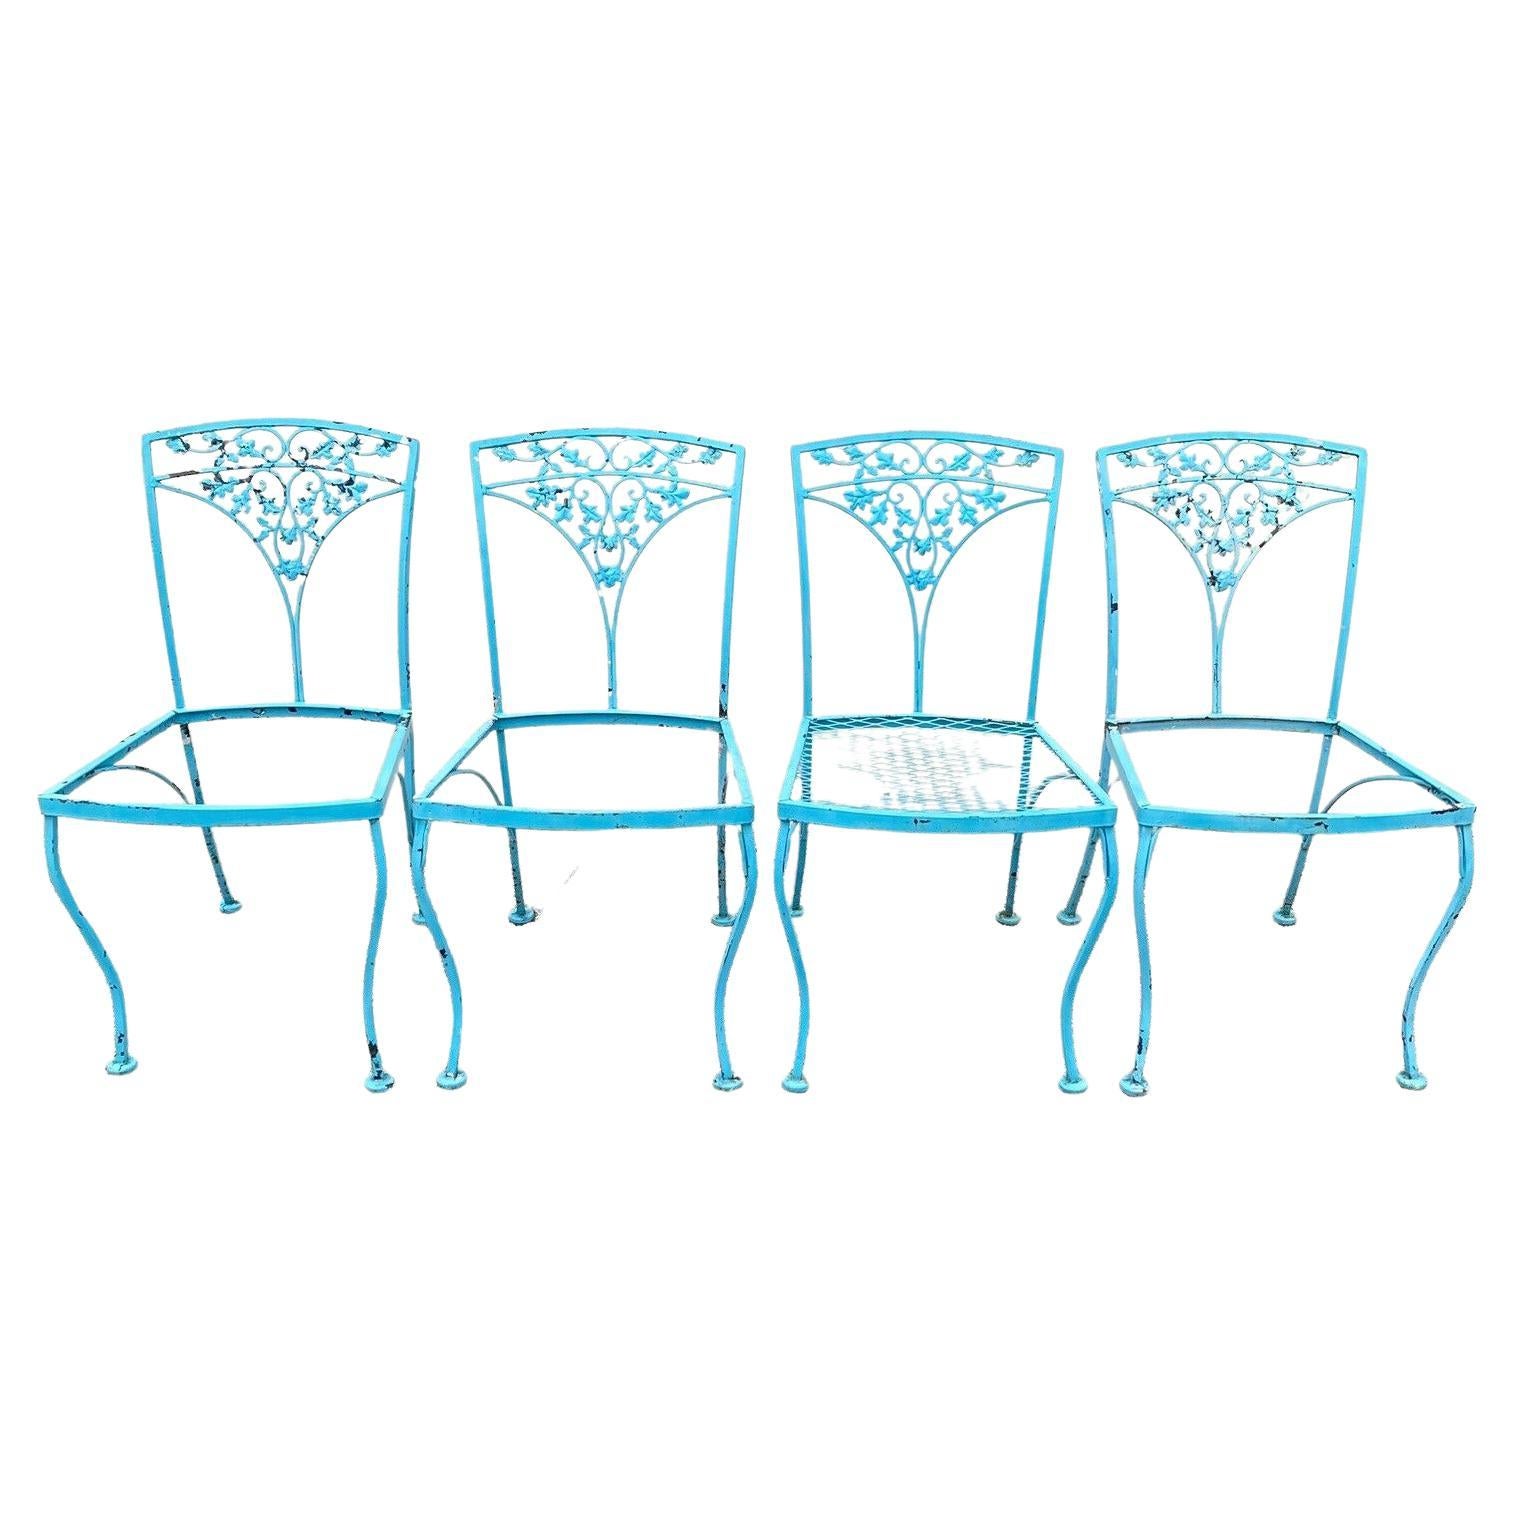 Vintage Woodard Orleans Pattern Wrought Iron Garden Patio Dining Chairs Set of 4